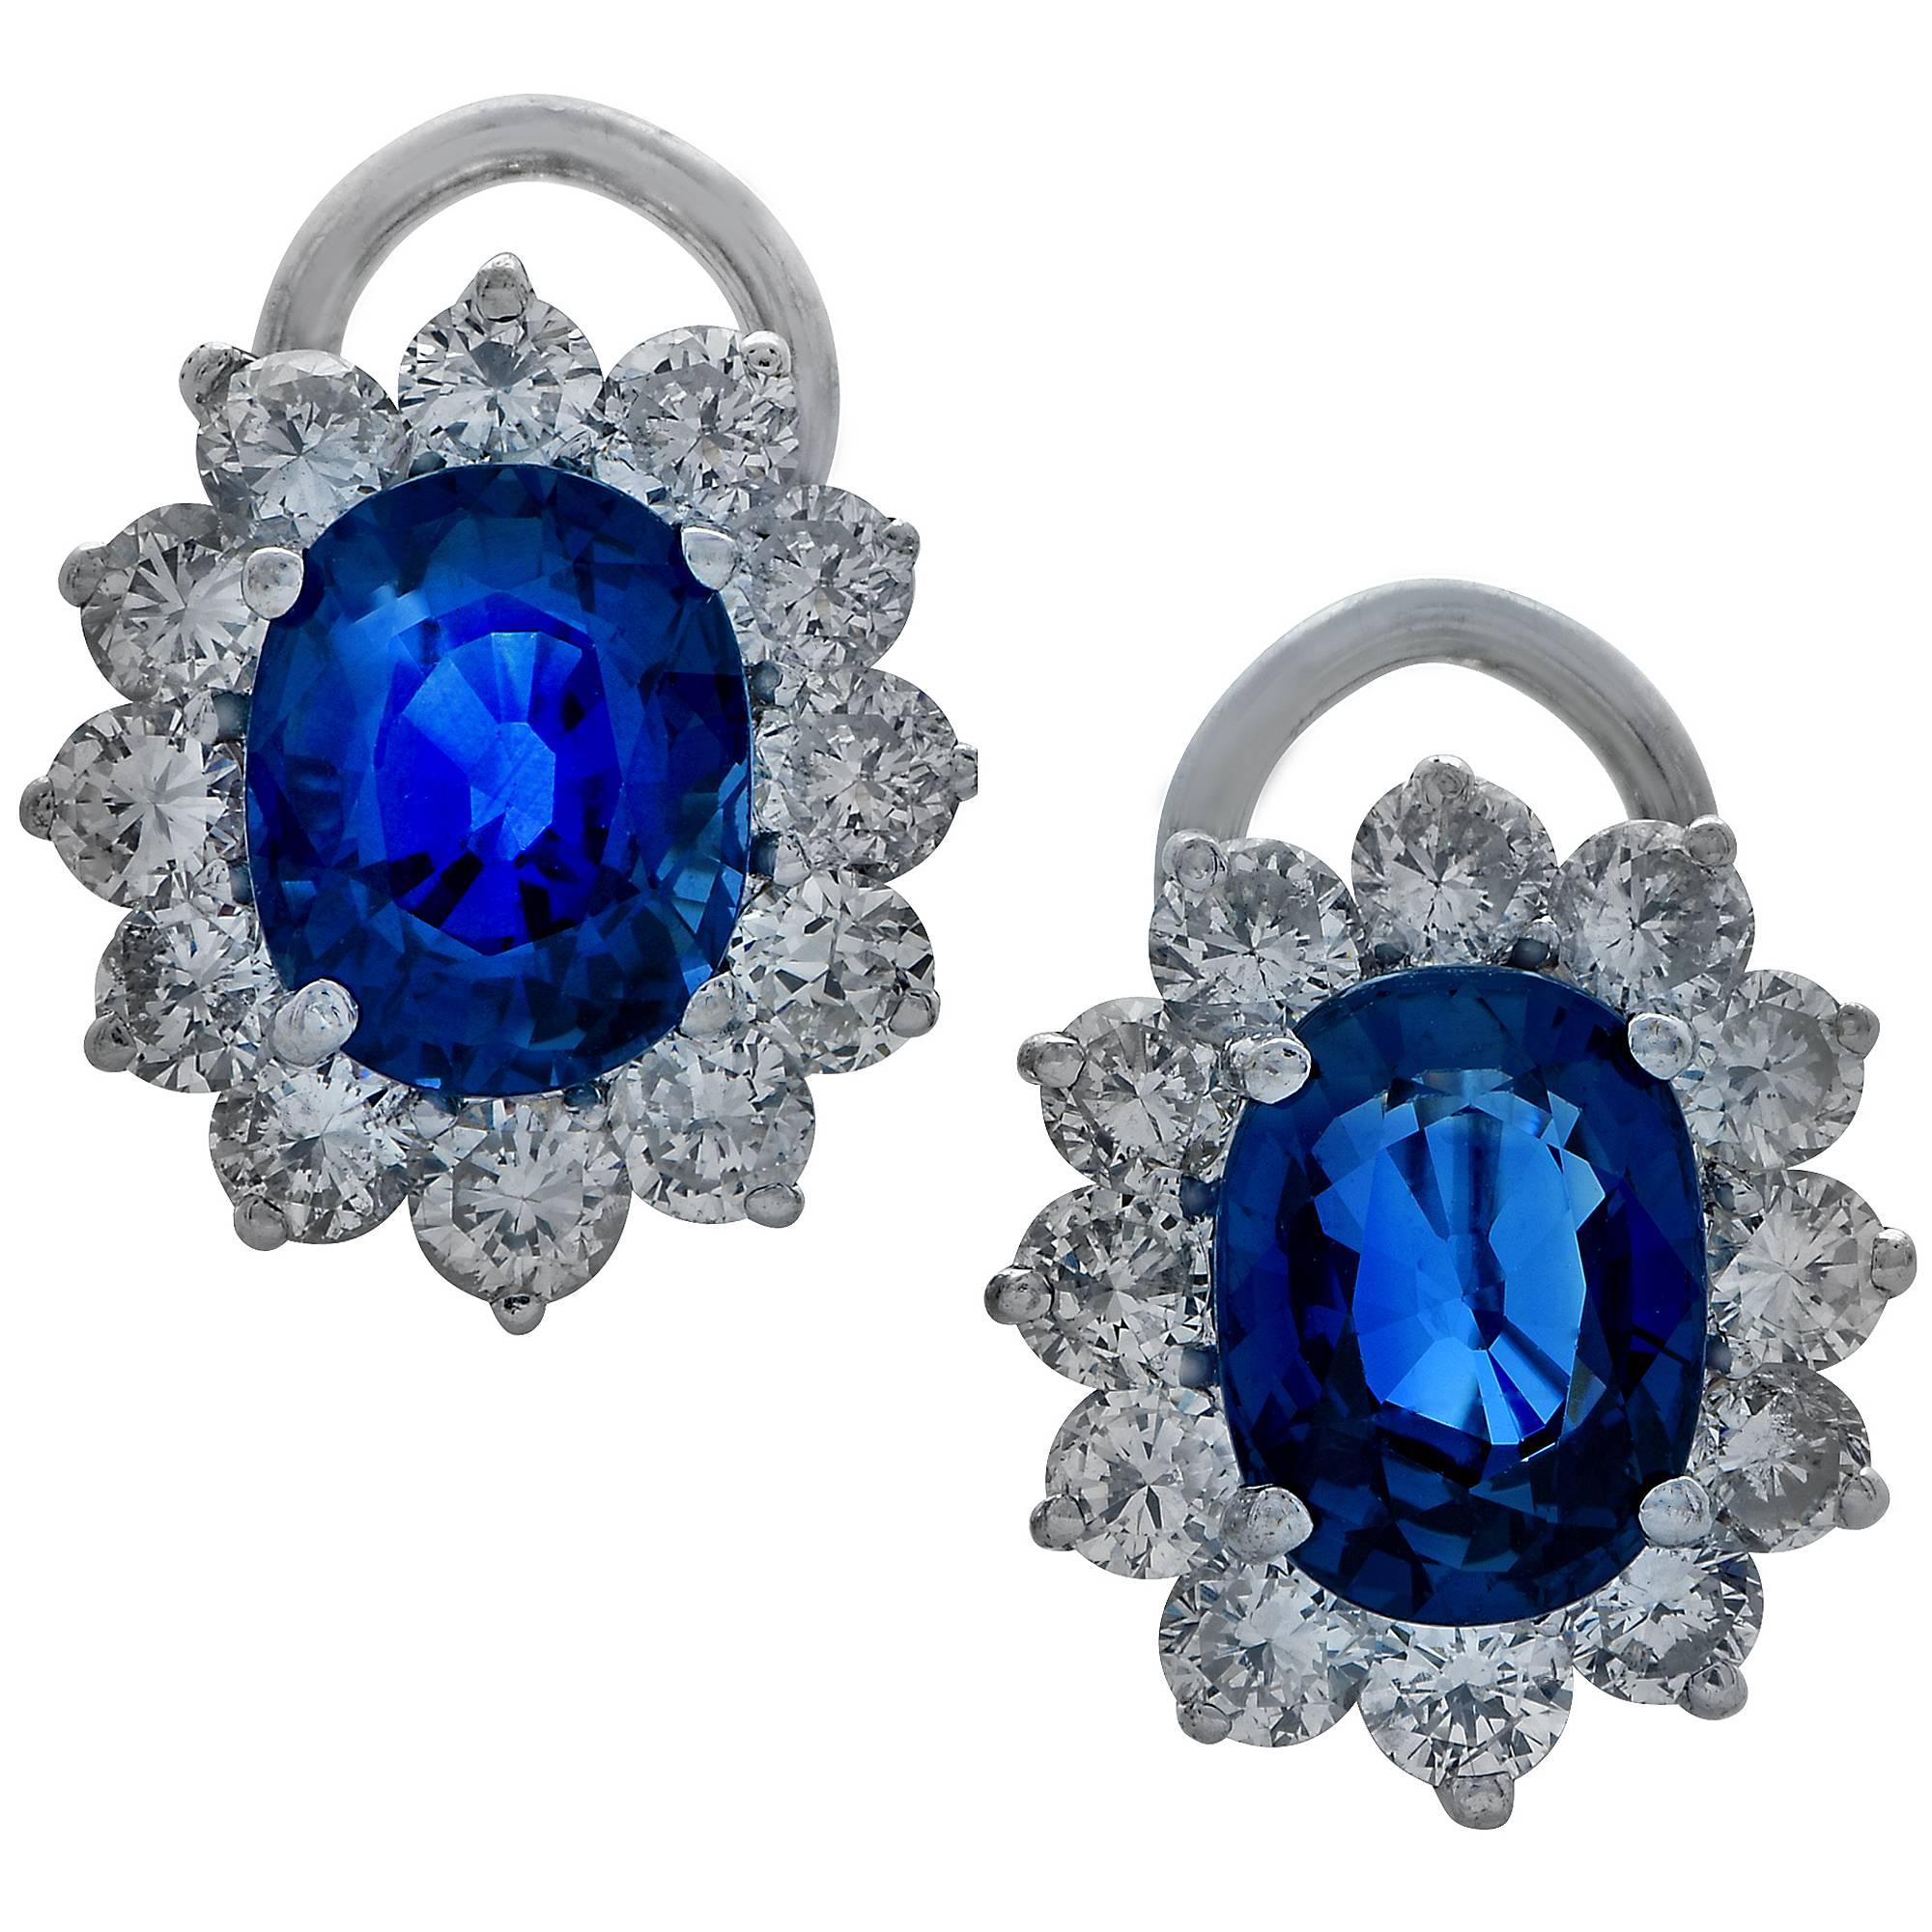 18k white gold earring featuring two oval sapphires weighing approximately 5cts surrounded 24 round brilliant cut diamonds weighing approximately 2.40cts F-G color and VS-SI clarity.

These earrings measure .60 inch in height by .50 inch in